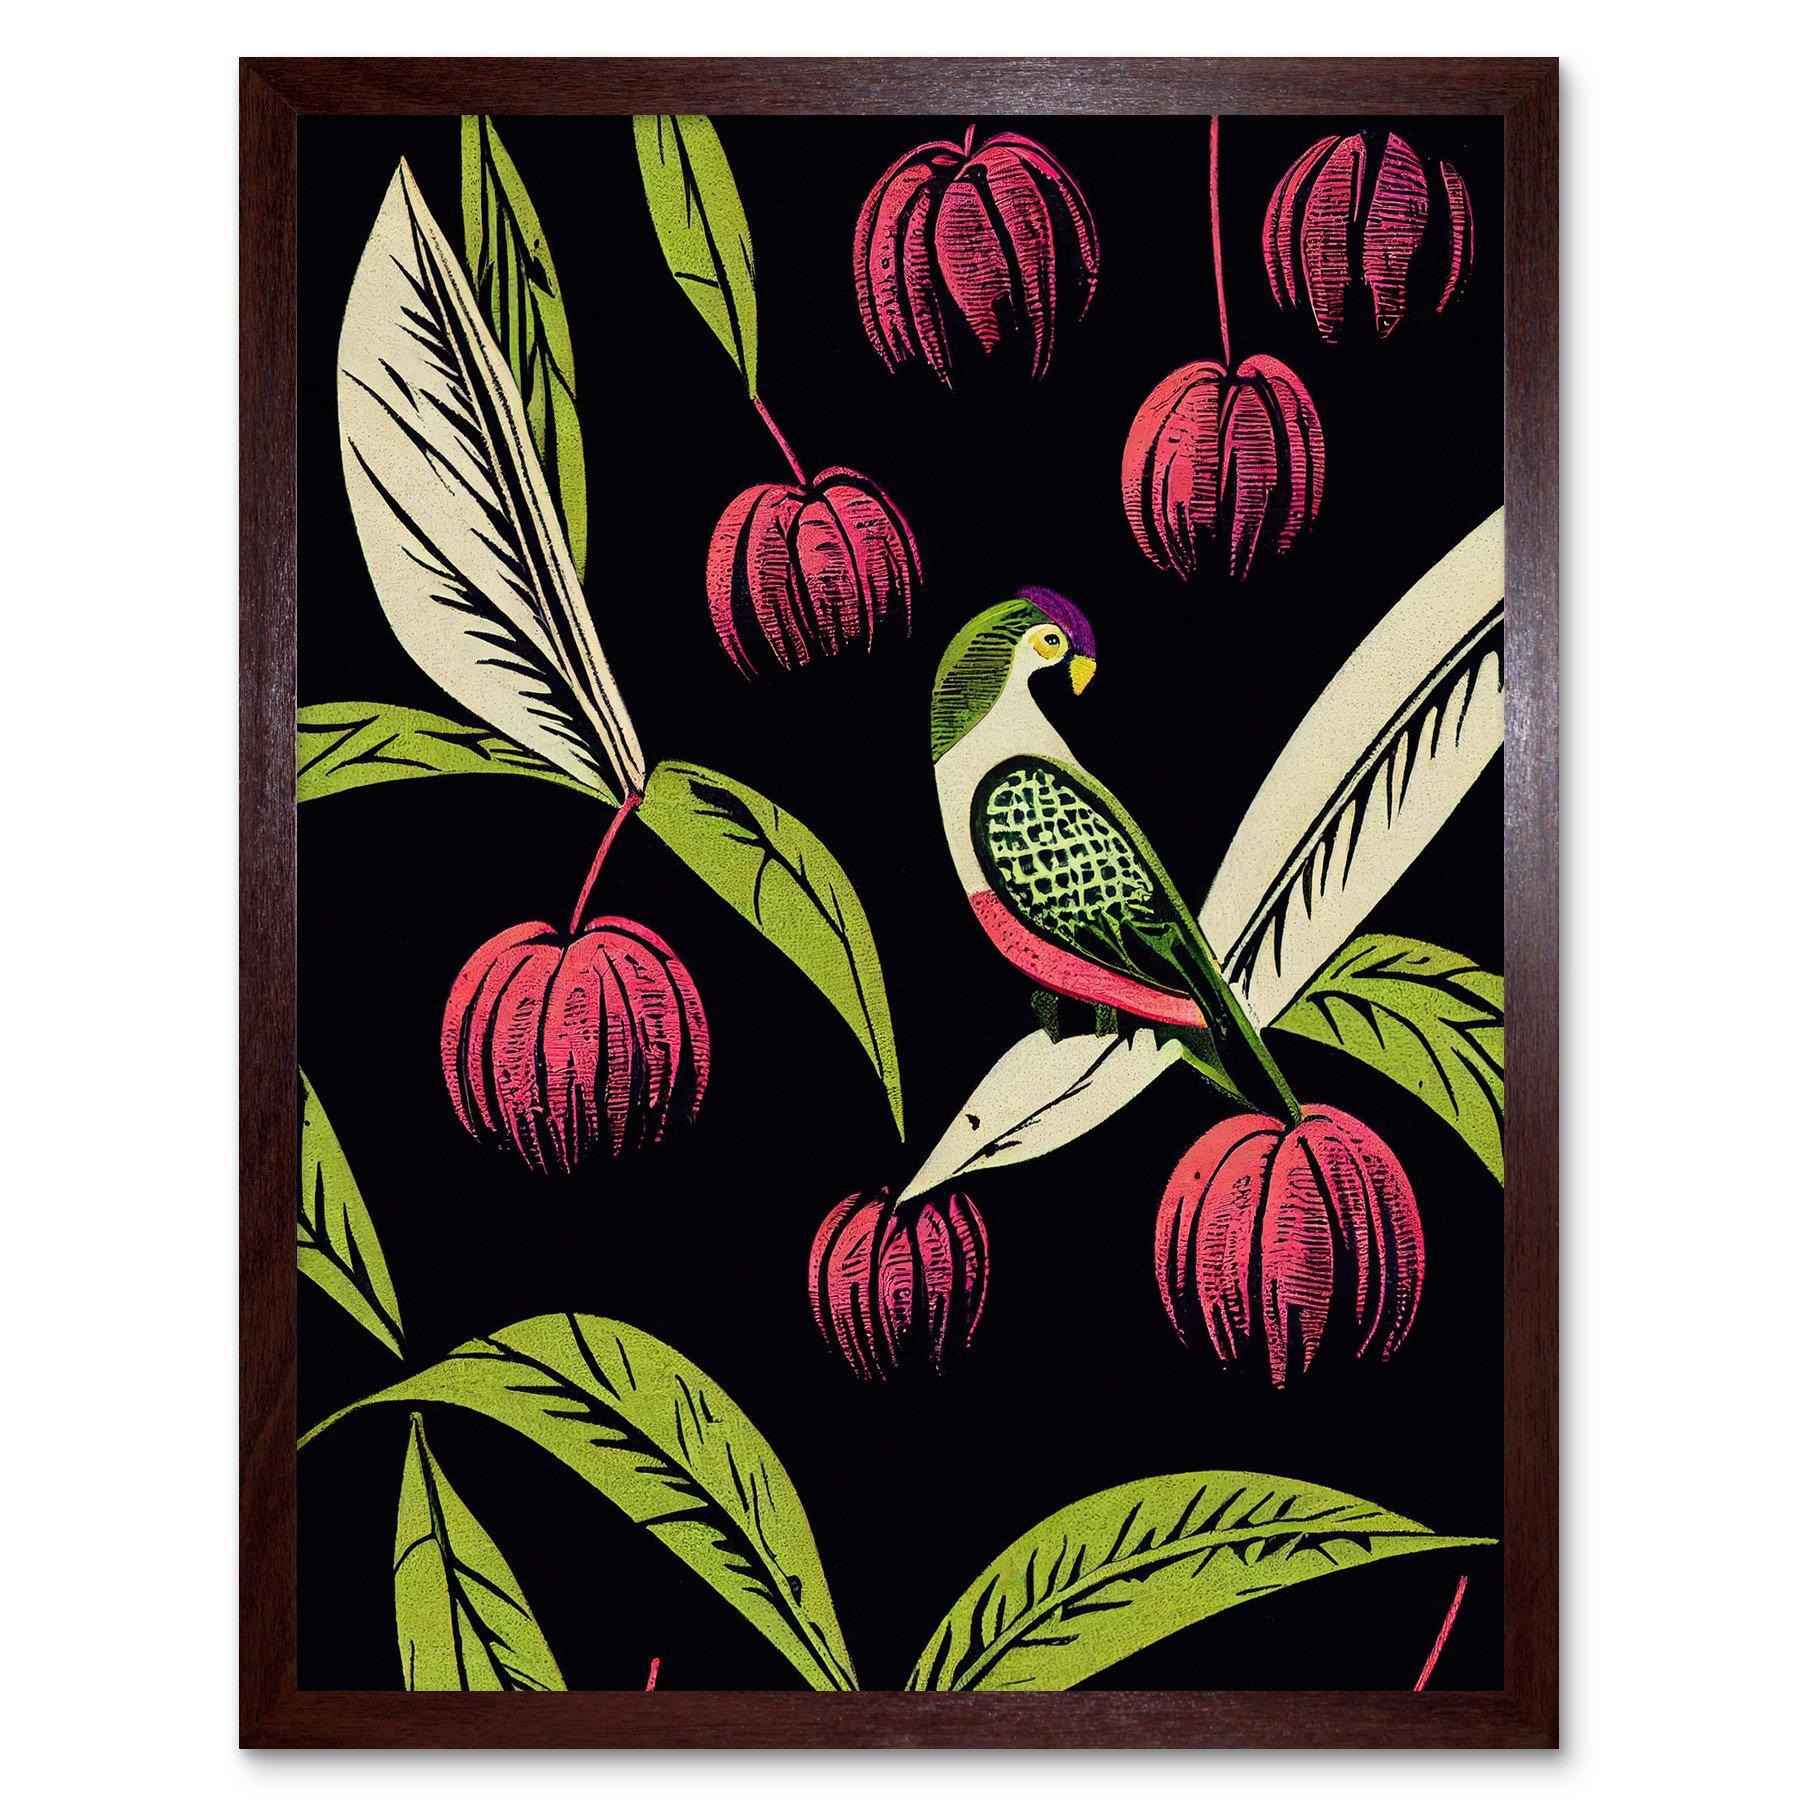 Wall Art Print Parrot in Tree Fruit Bright Green and Pink Black Colour Linocut Modern Vintage Art Framed - image 1